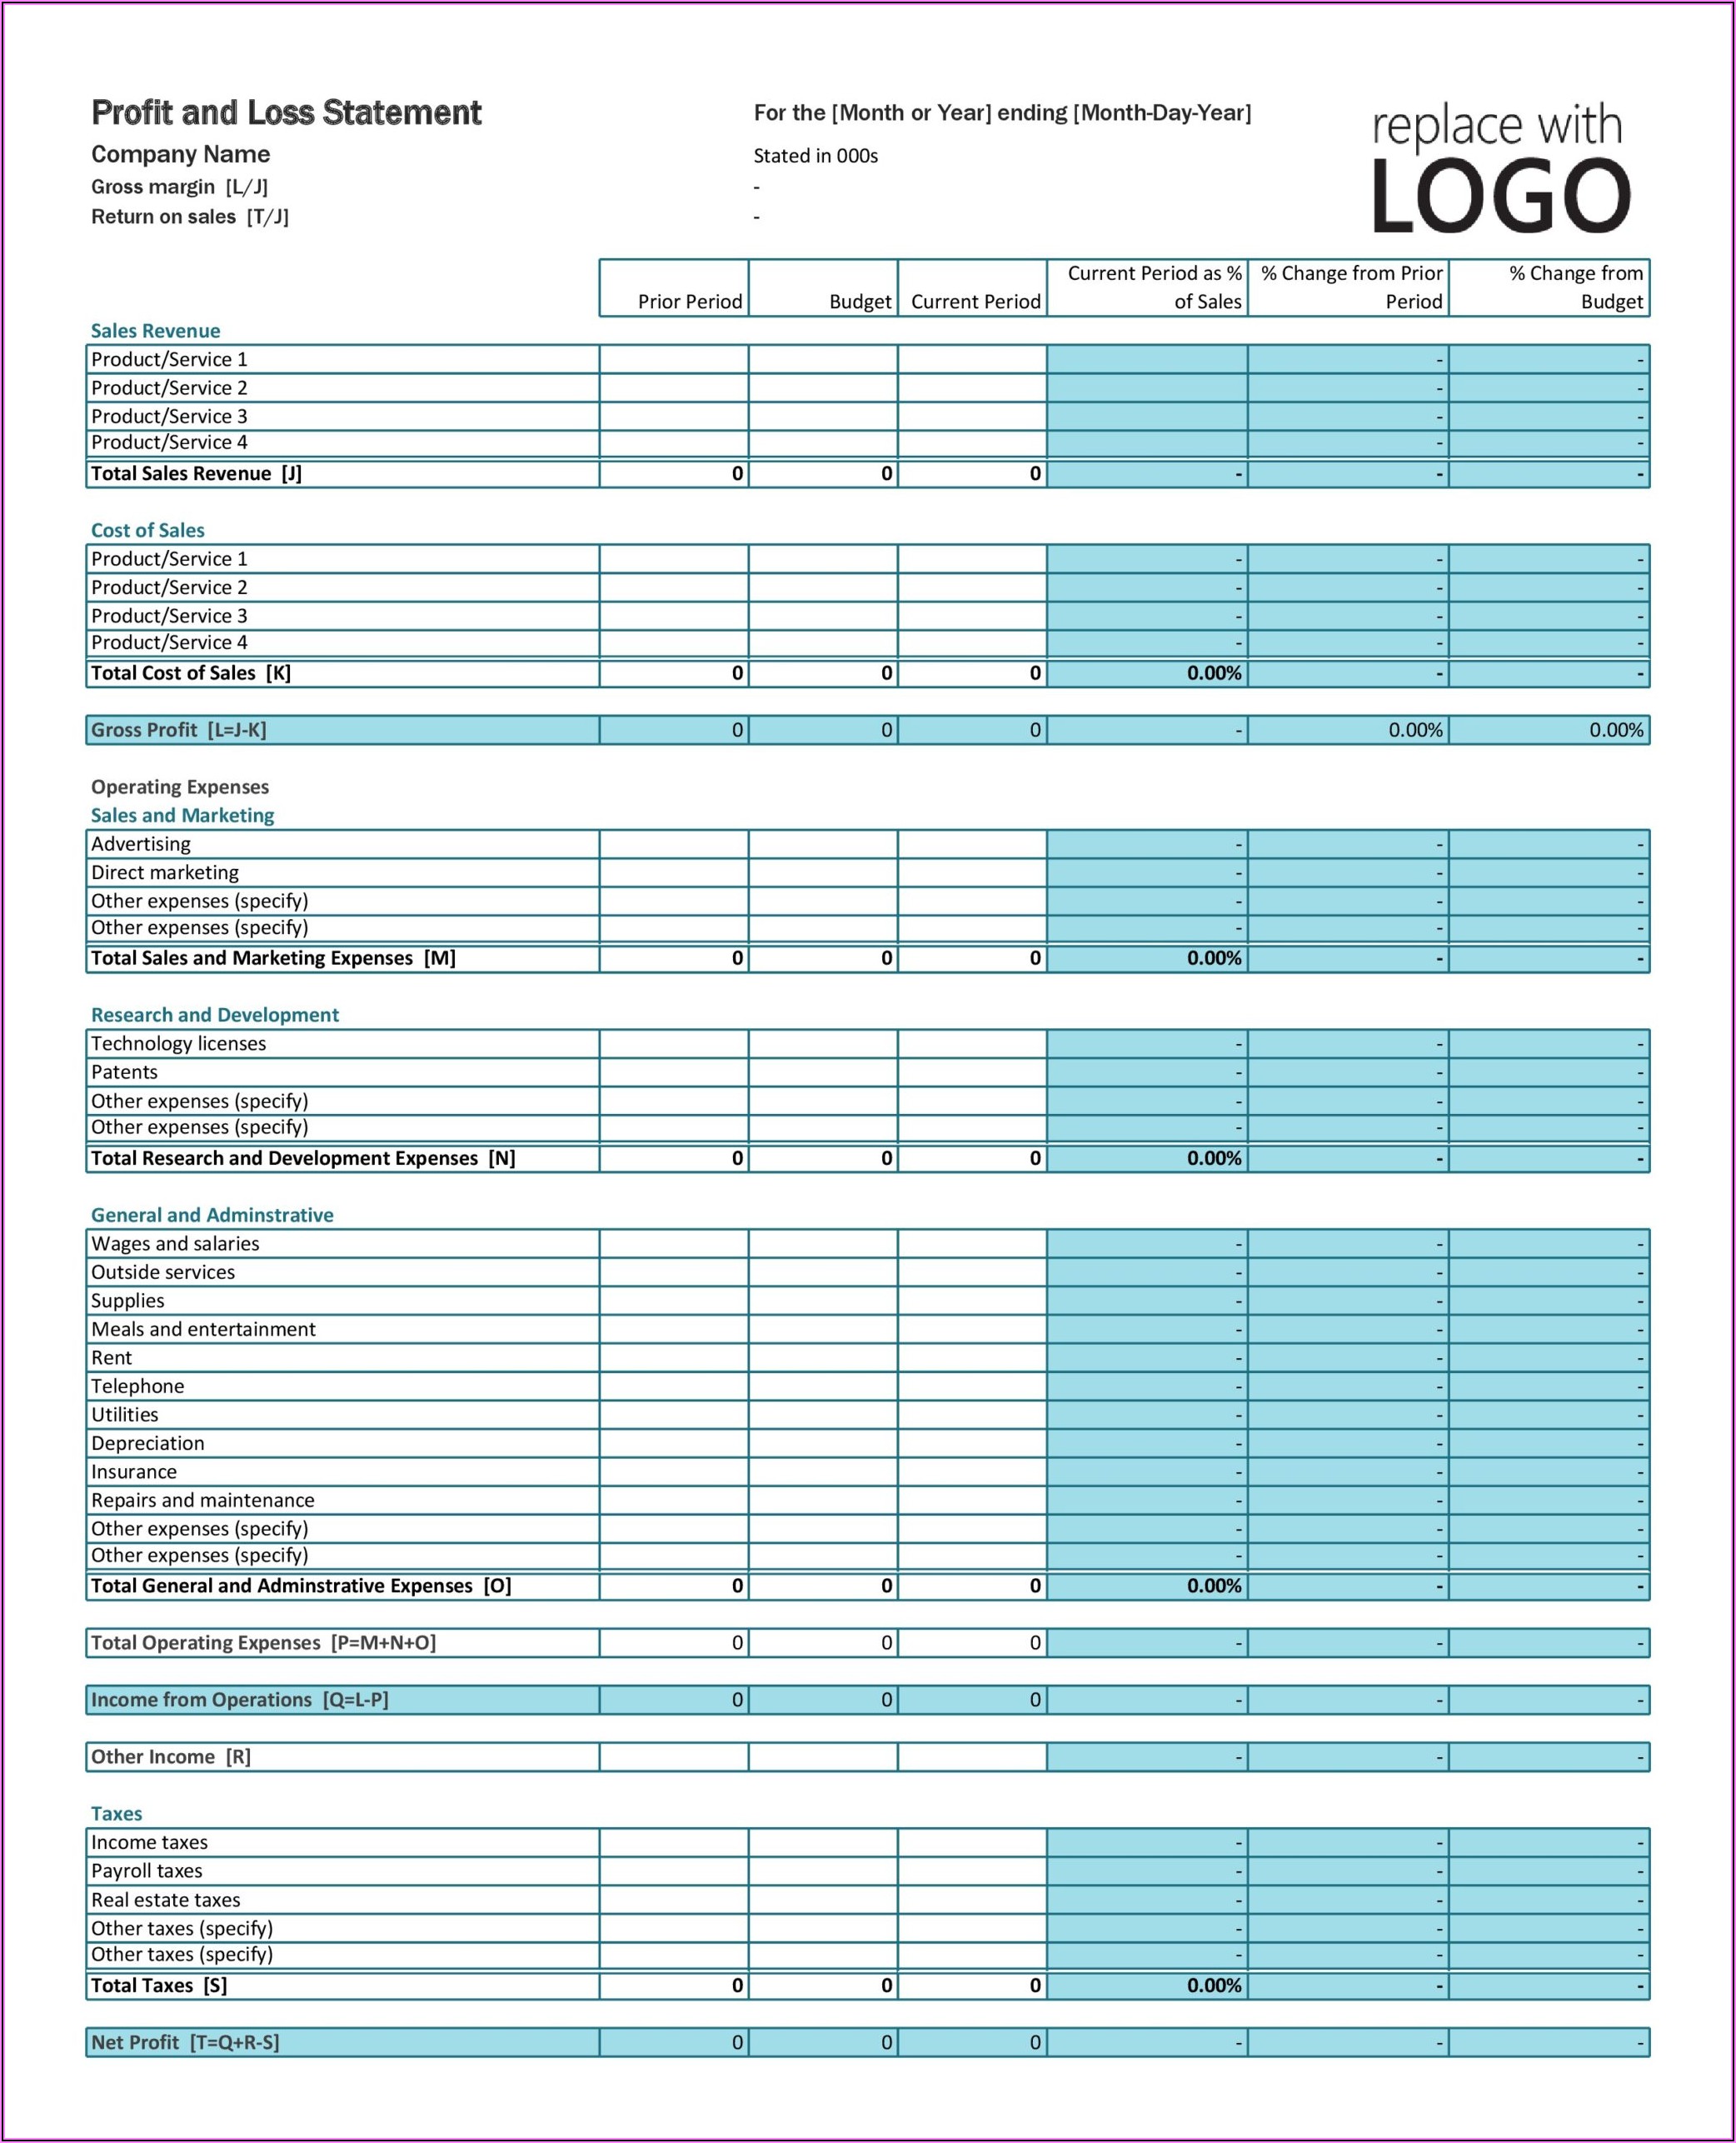 Year To Date Profit And Loss Statement And Balance Sheet Template